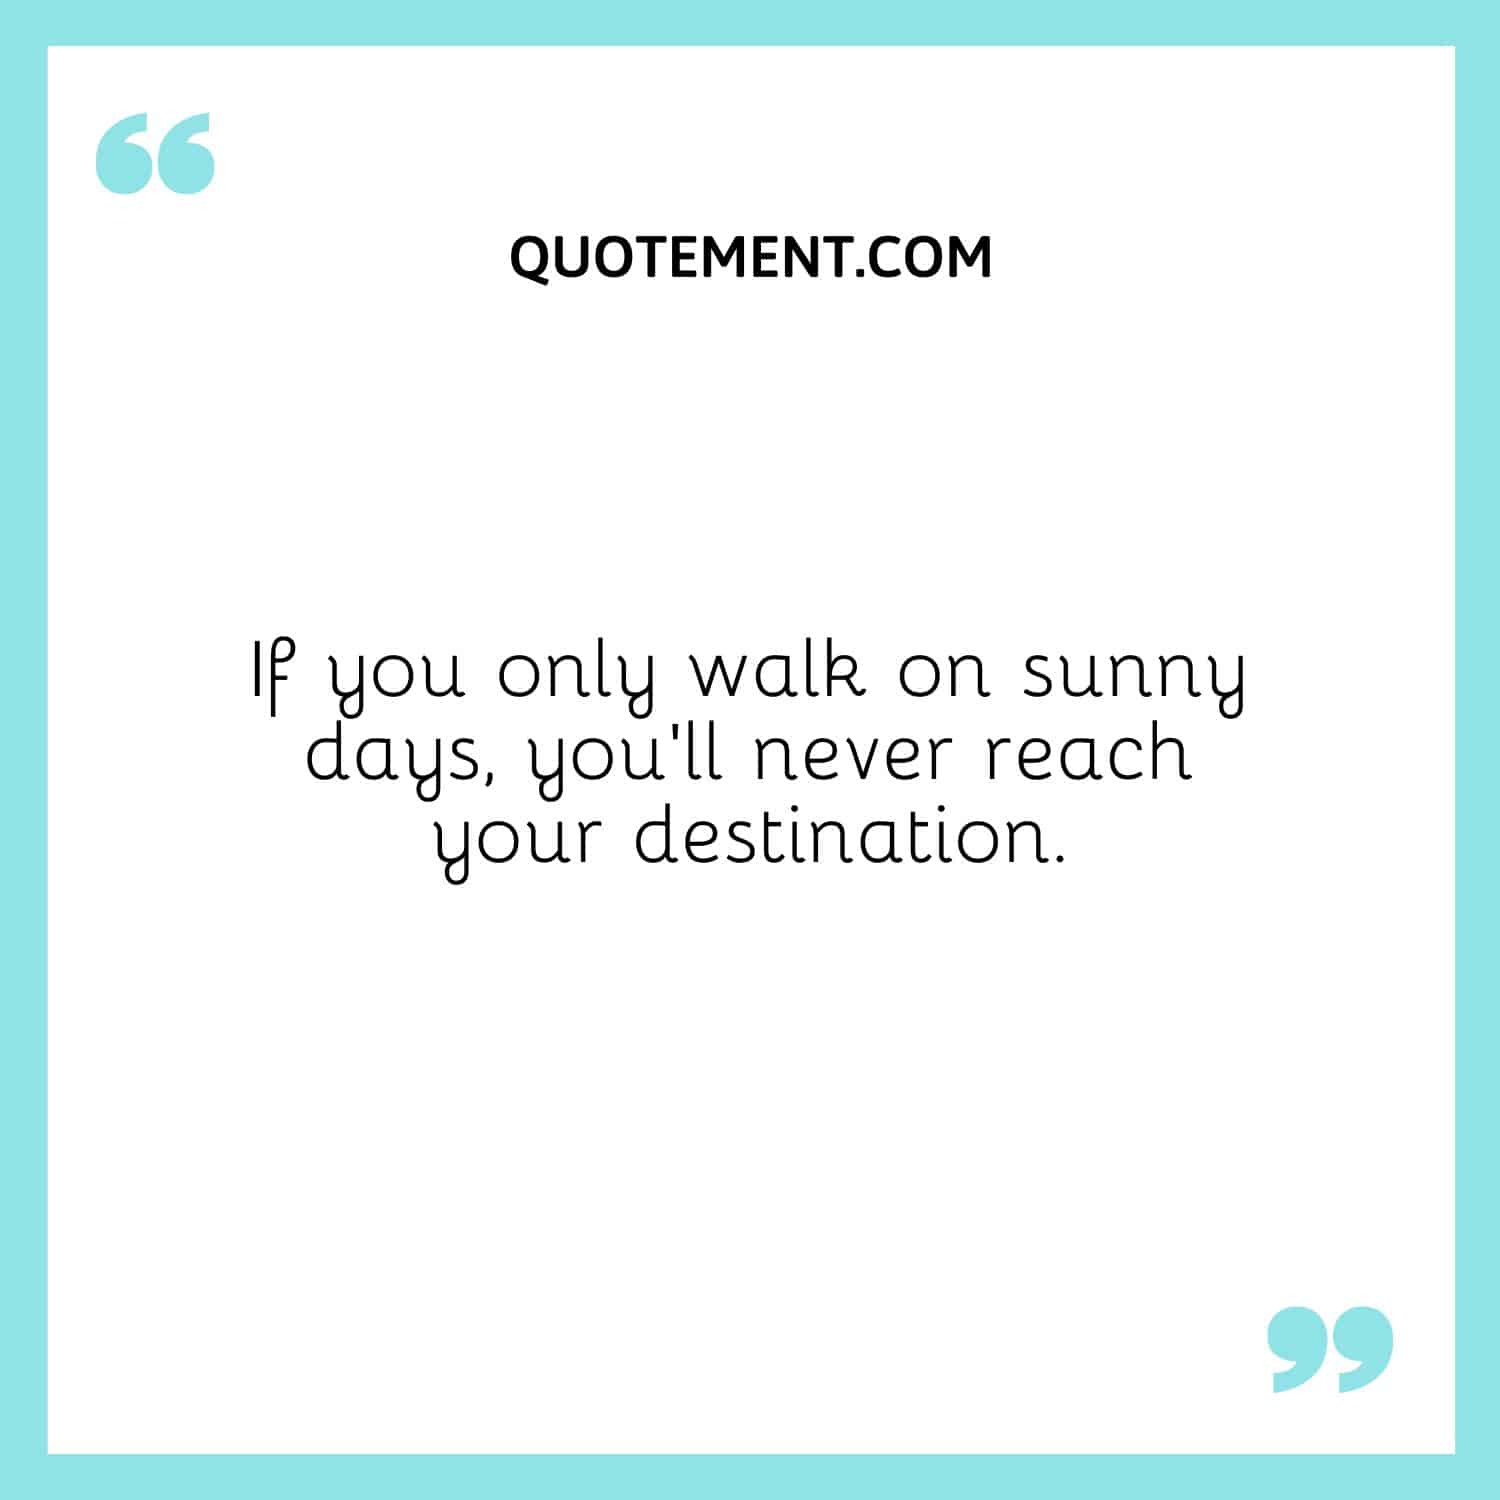 If you only walk on sunny days, you’ll never reach your destination.